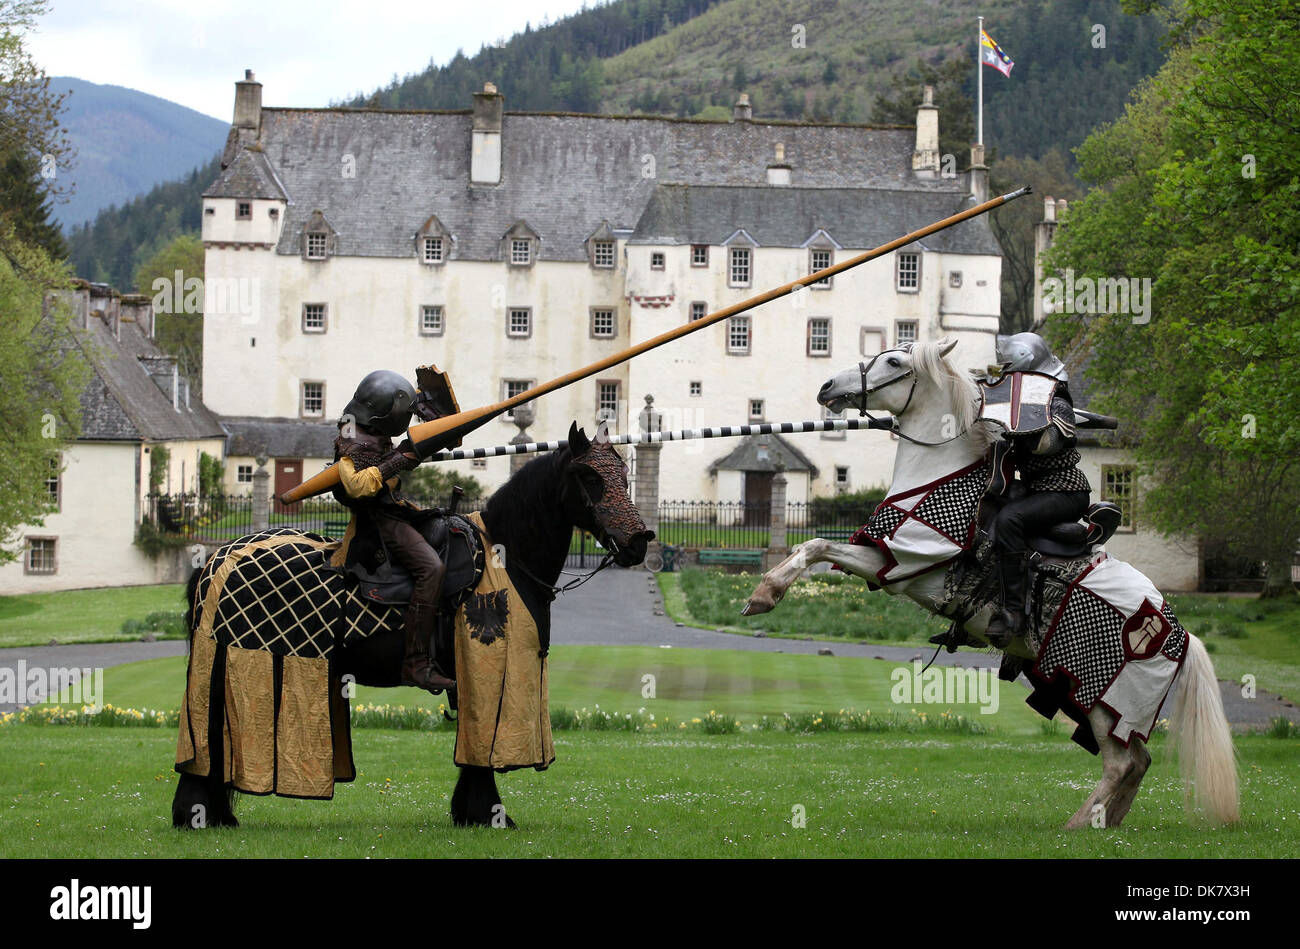 People take part in rehearsals for a Medieval Fayre at Traquair House, Innerleithen, Scotland. Stock Photo